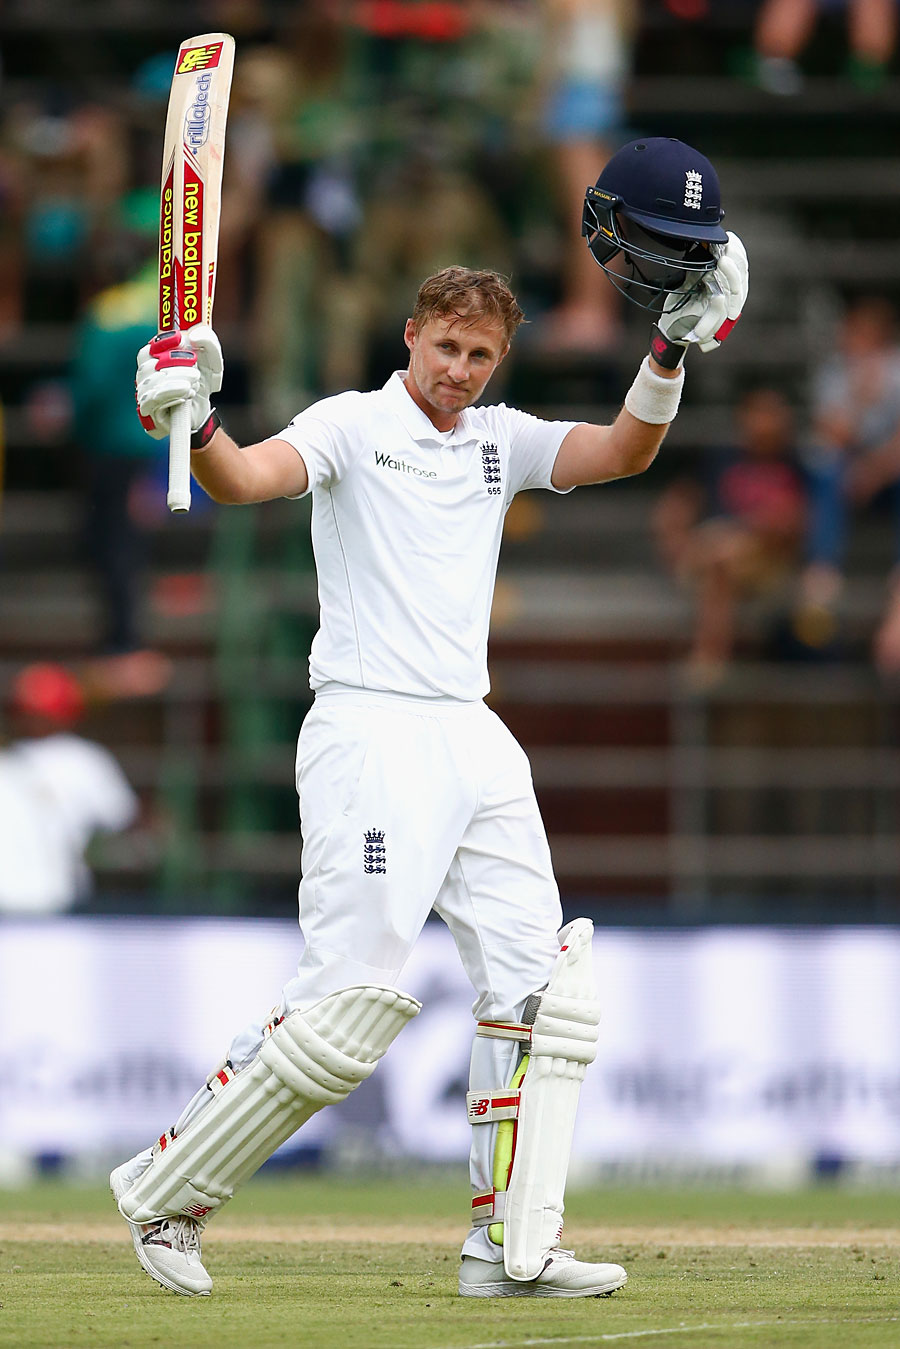 Joe Root celebrates his ninth Test hundred on the 2nd day of 3rd Test between South Africa and England at Johannesburg on Saturday.